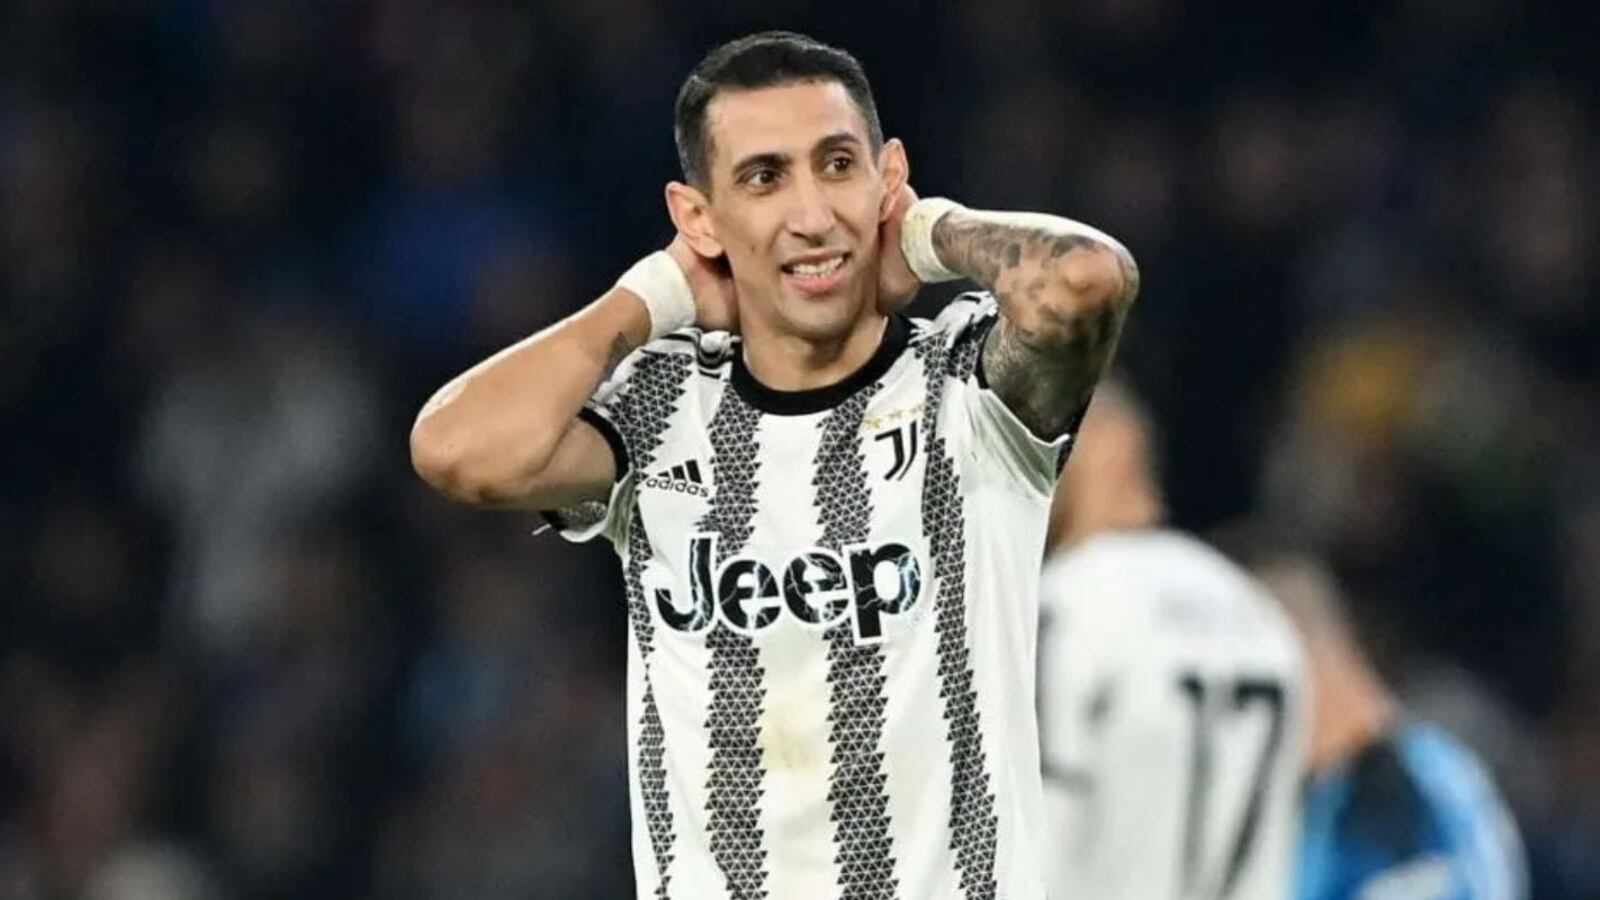 He will leave Juventus, Di Maria and his decision to return to Premier League